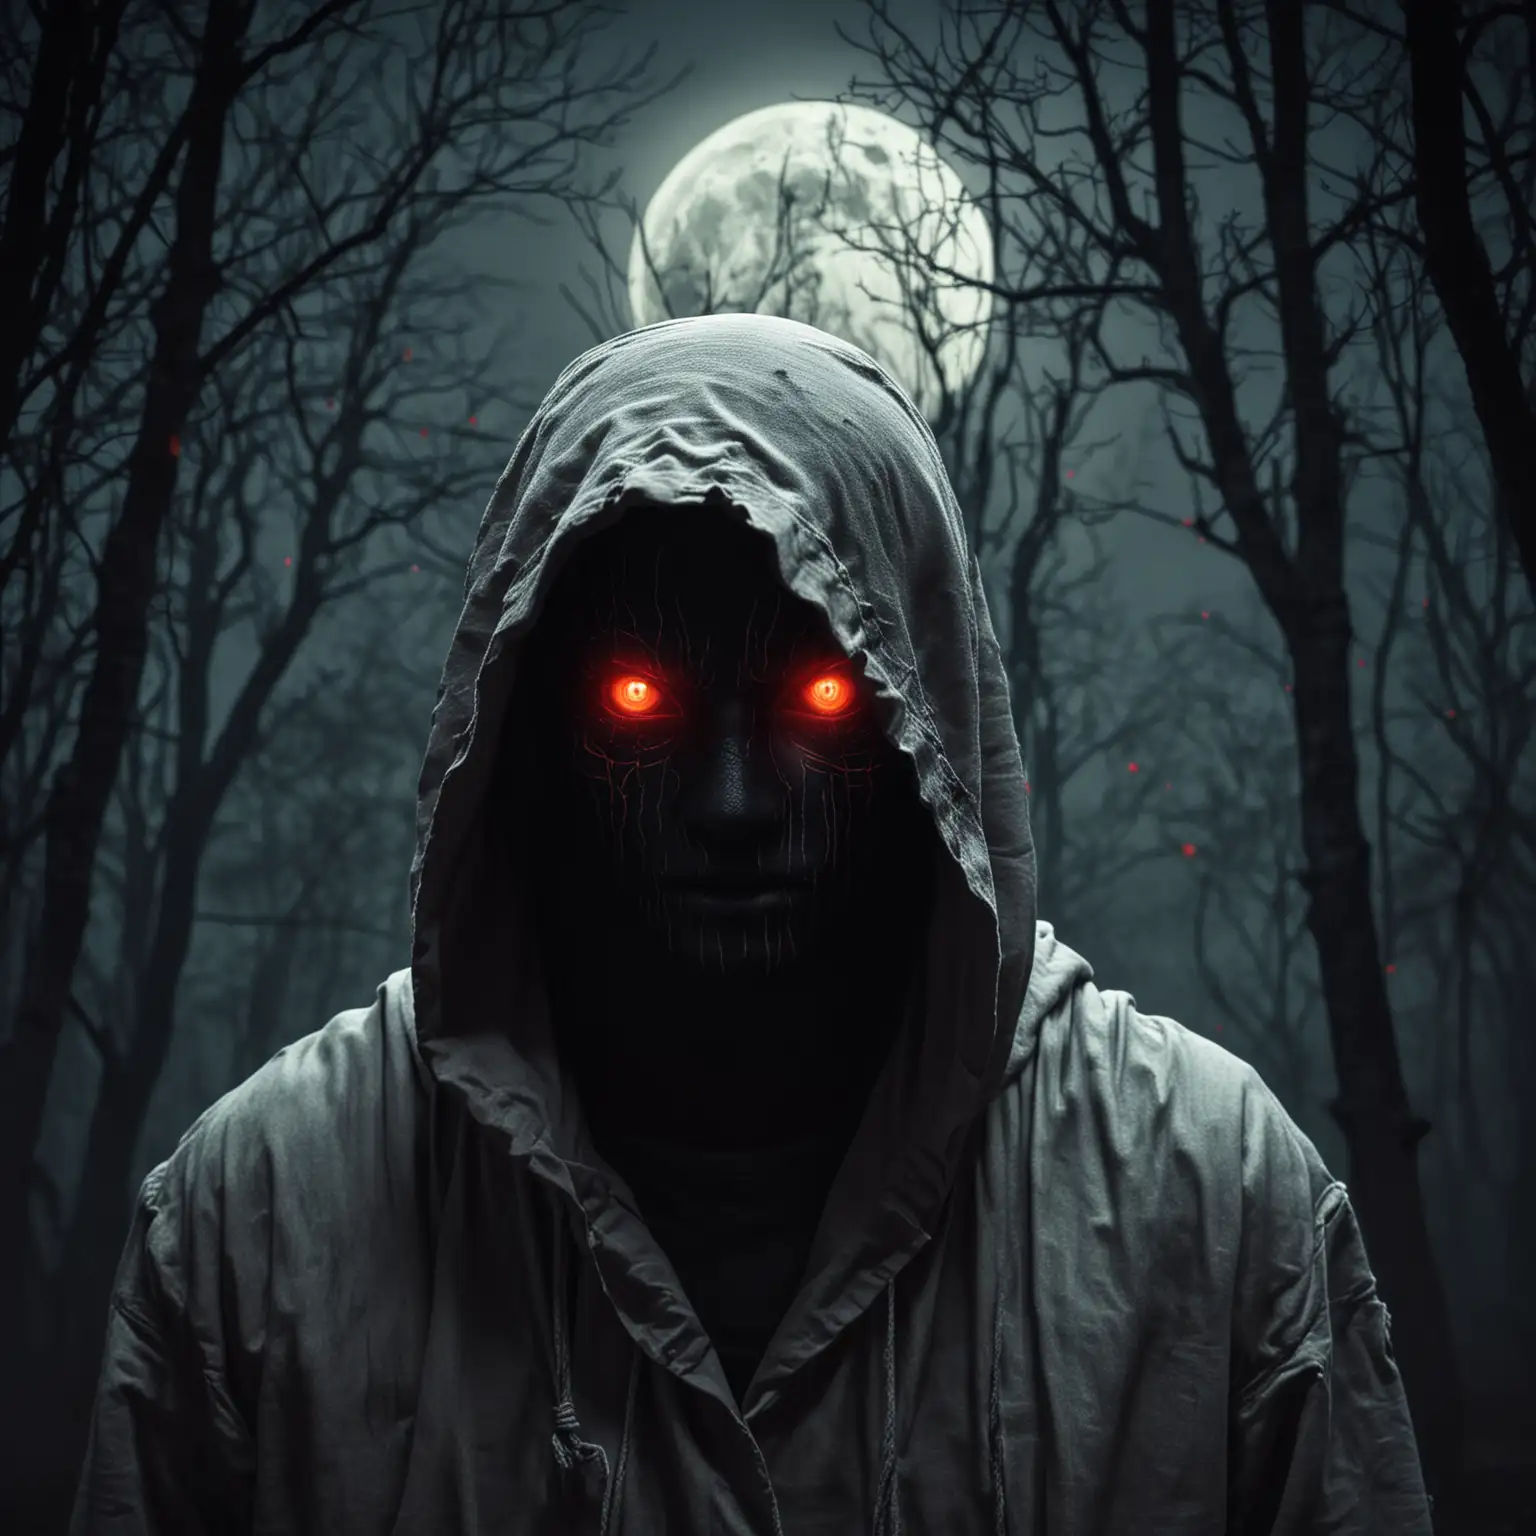 Mysterious Hooded Figure with Glowing Red Eyes in Moonlight